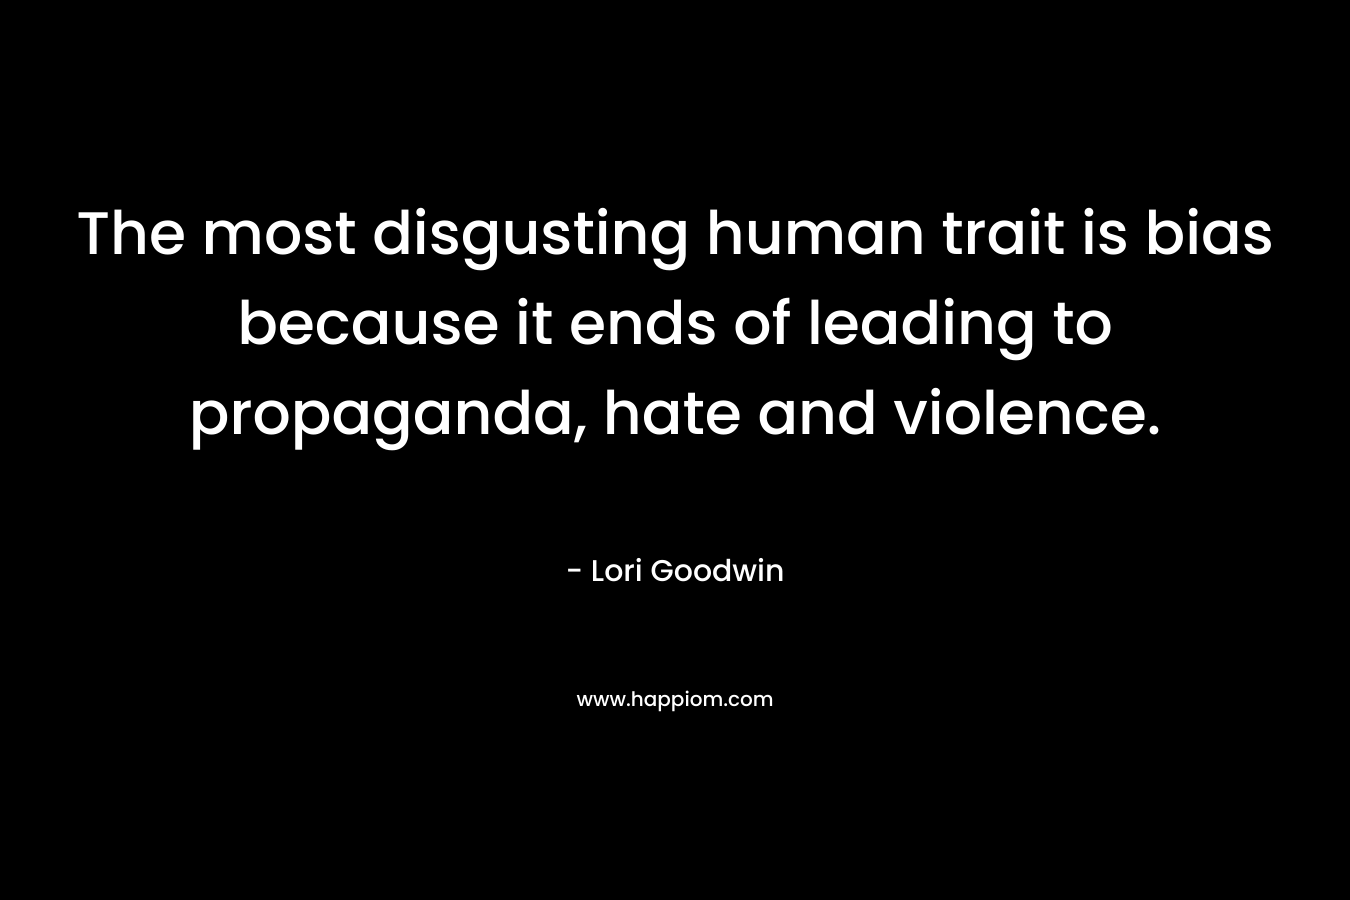 The most disgusting human trait is bias because it ends of leading to propaganda, hate and violence. – Lori Goodwin